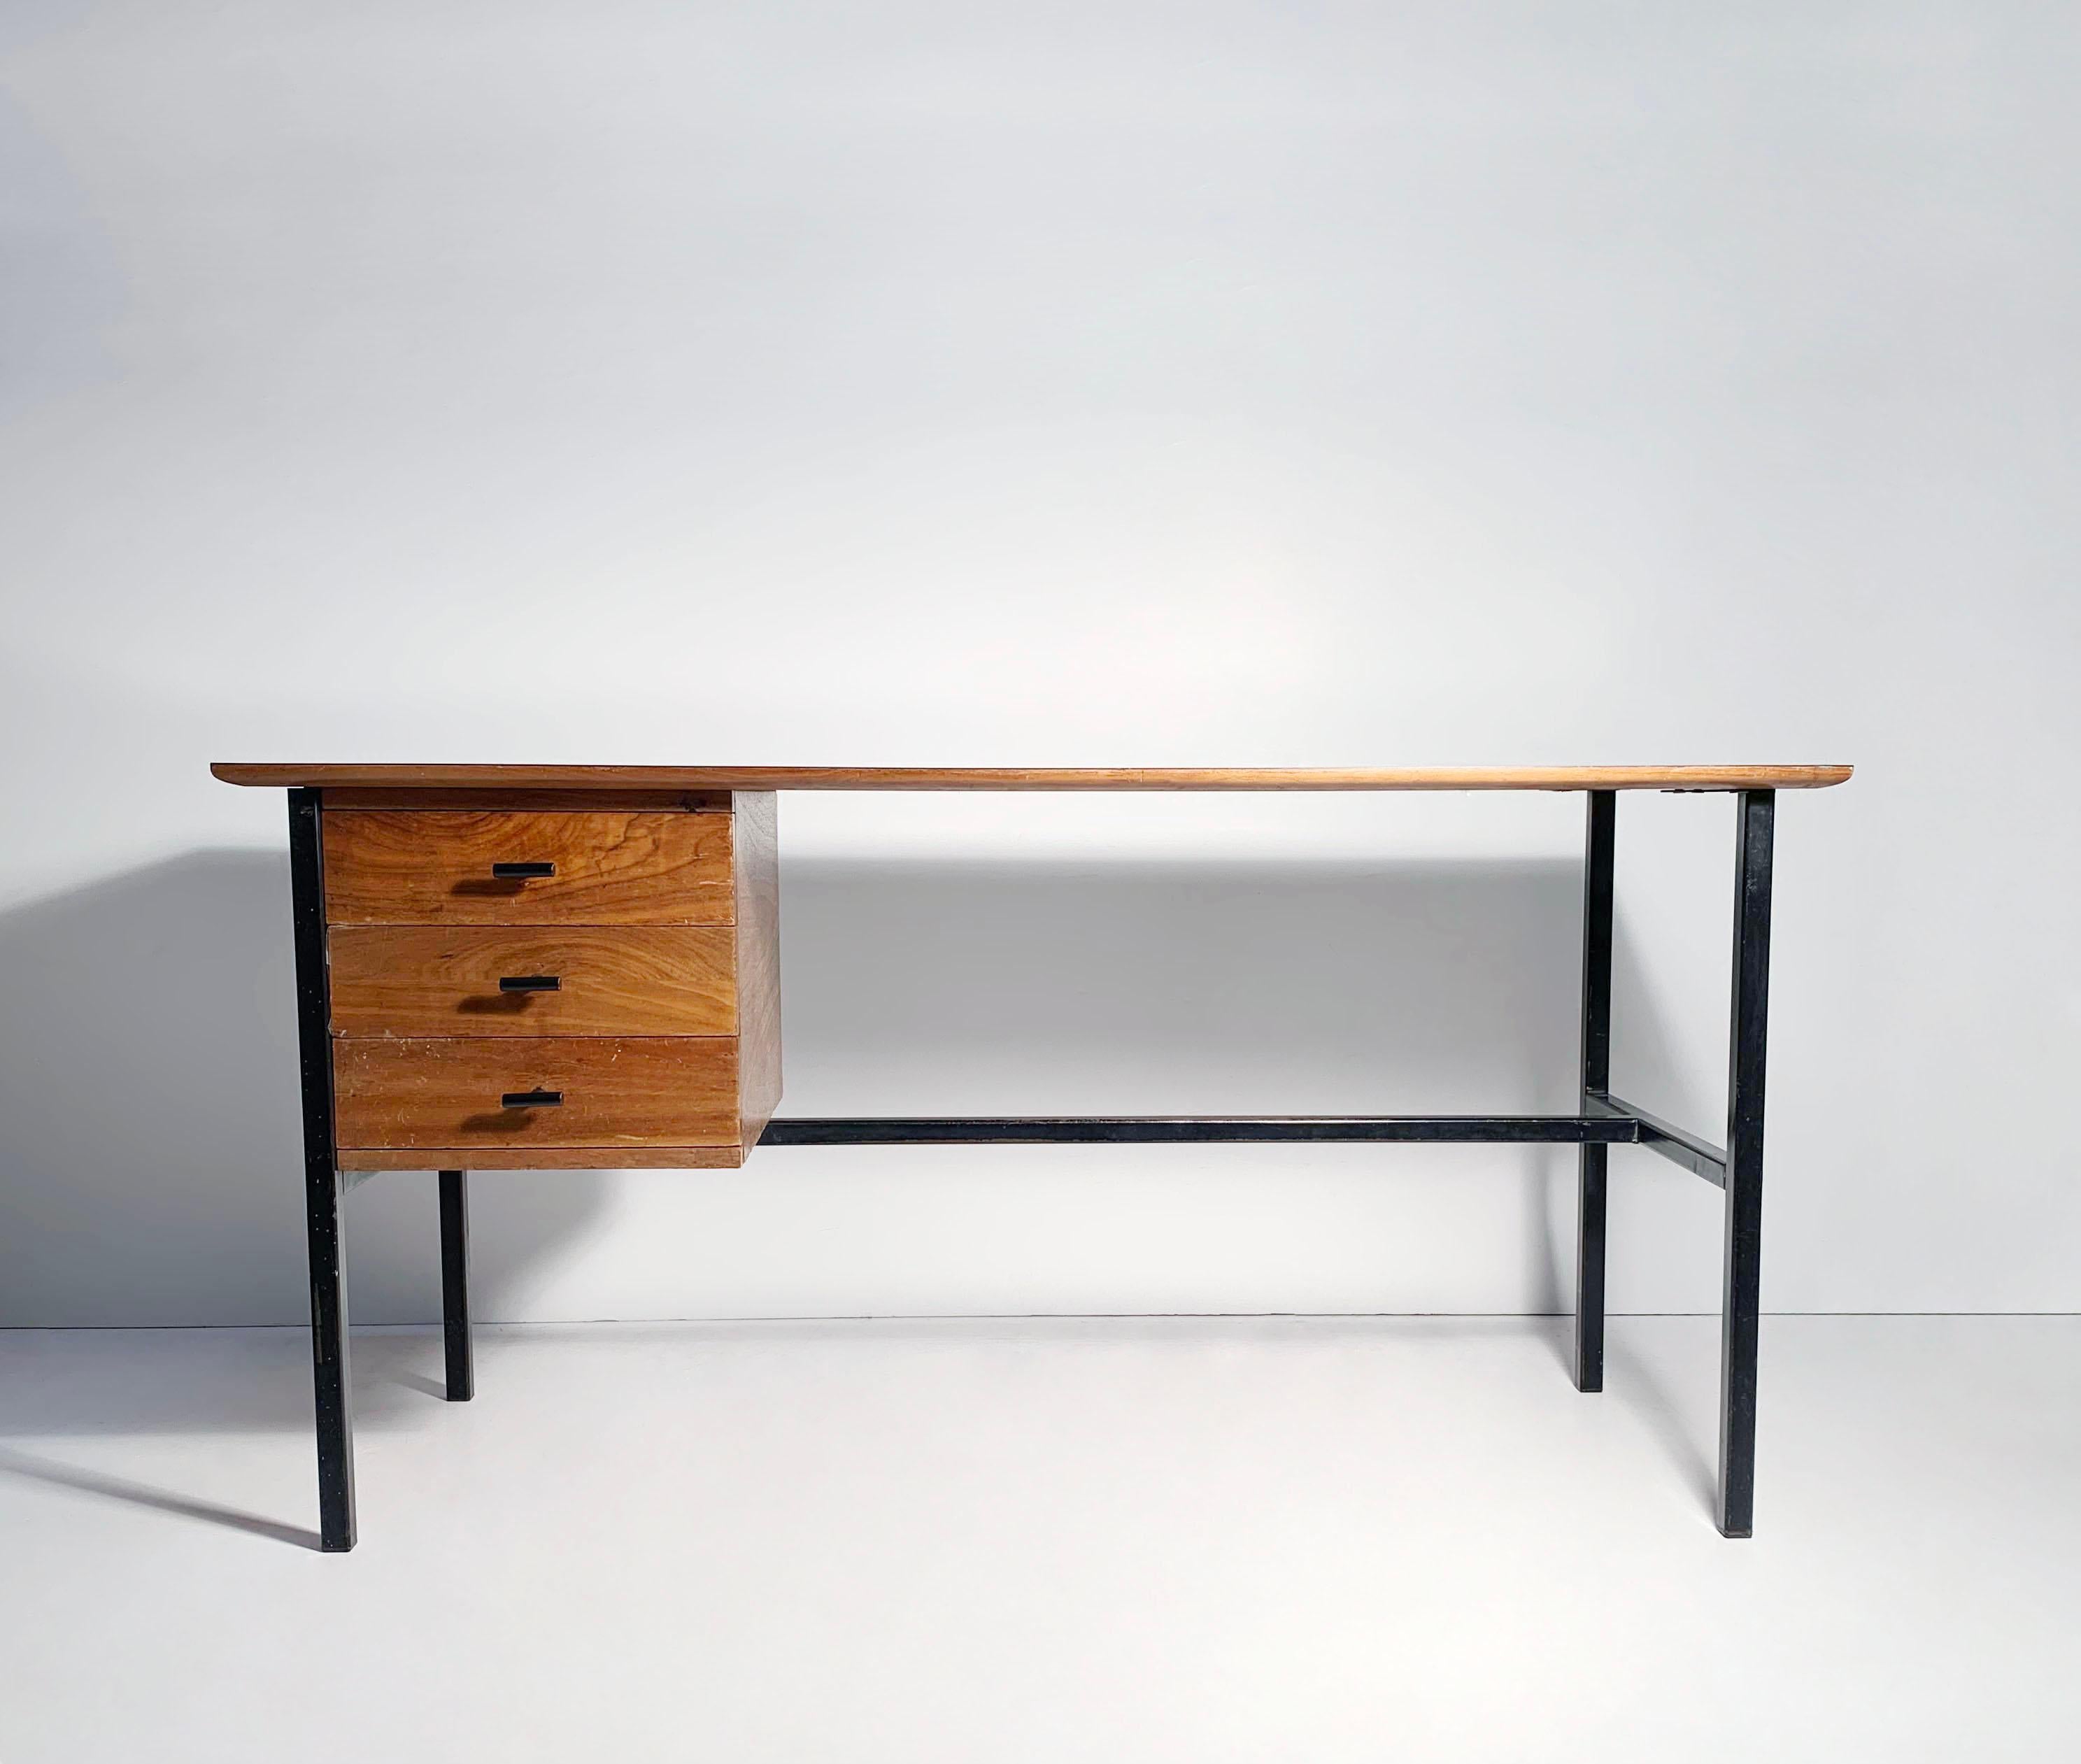 A nicely proportioned vintage desk attributed to Thonet. A more unusual size to find. More Slim.
Faux wood grain laminate top. Could possibly be edited with a sheet of wood veneer.

In the manner of Florence Knoll and Pierre Paulin